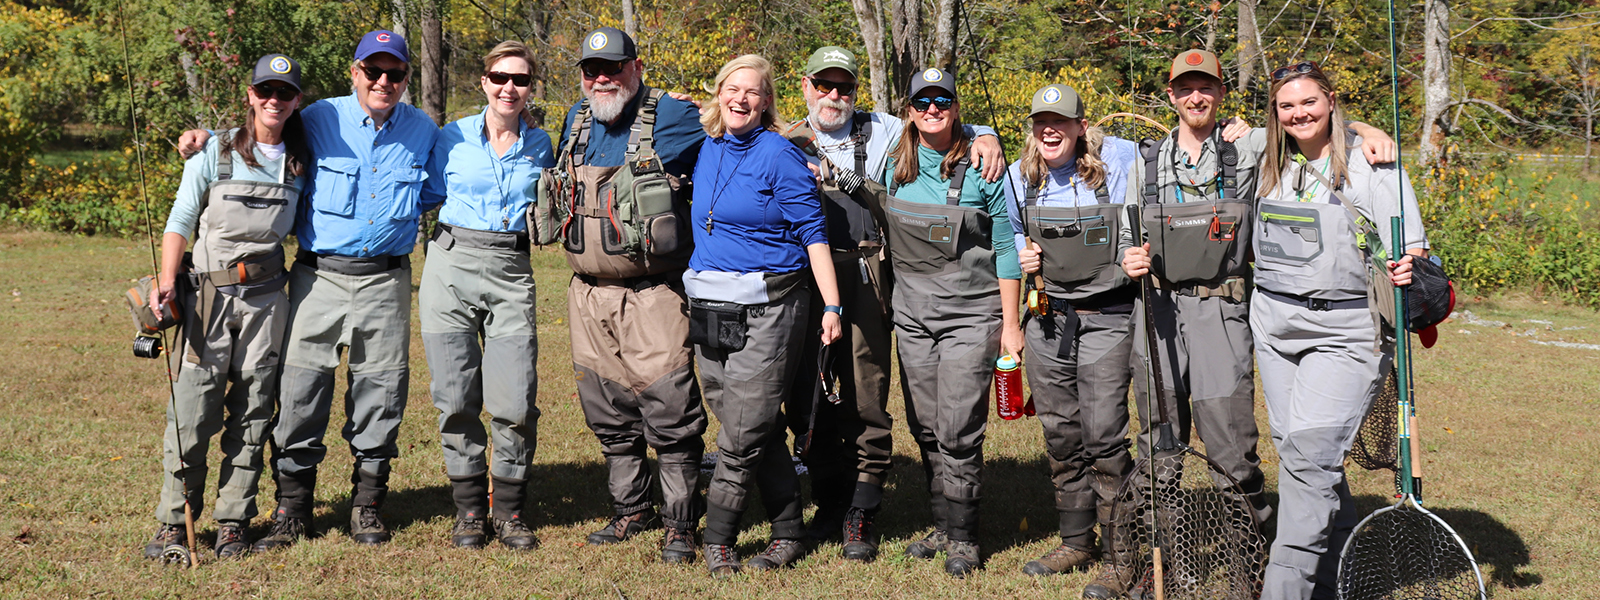 A group of ten people wearing fishing gear and waders stand outdoors in a line, smiling at the camera.